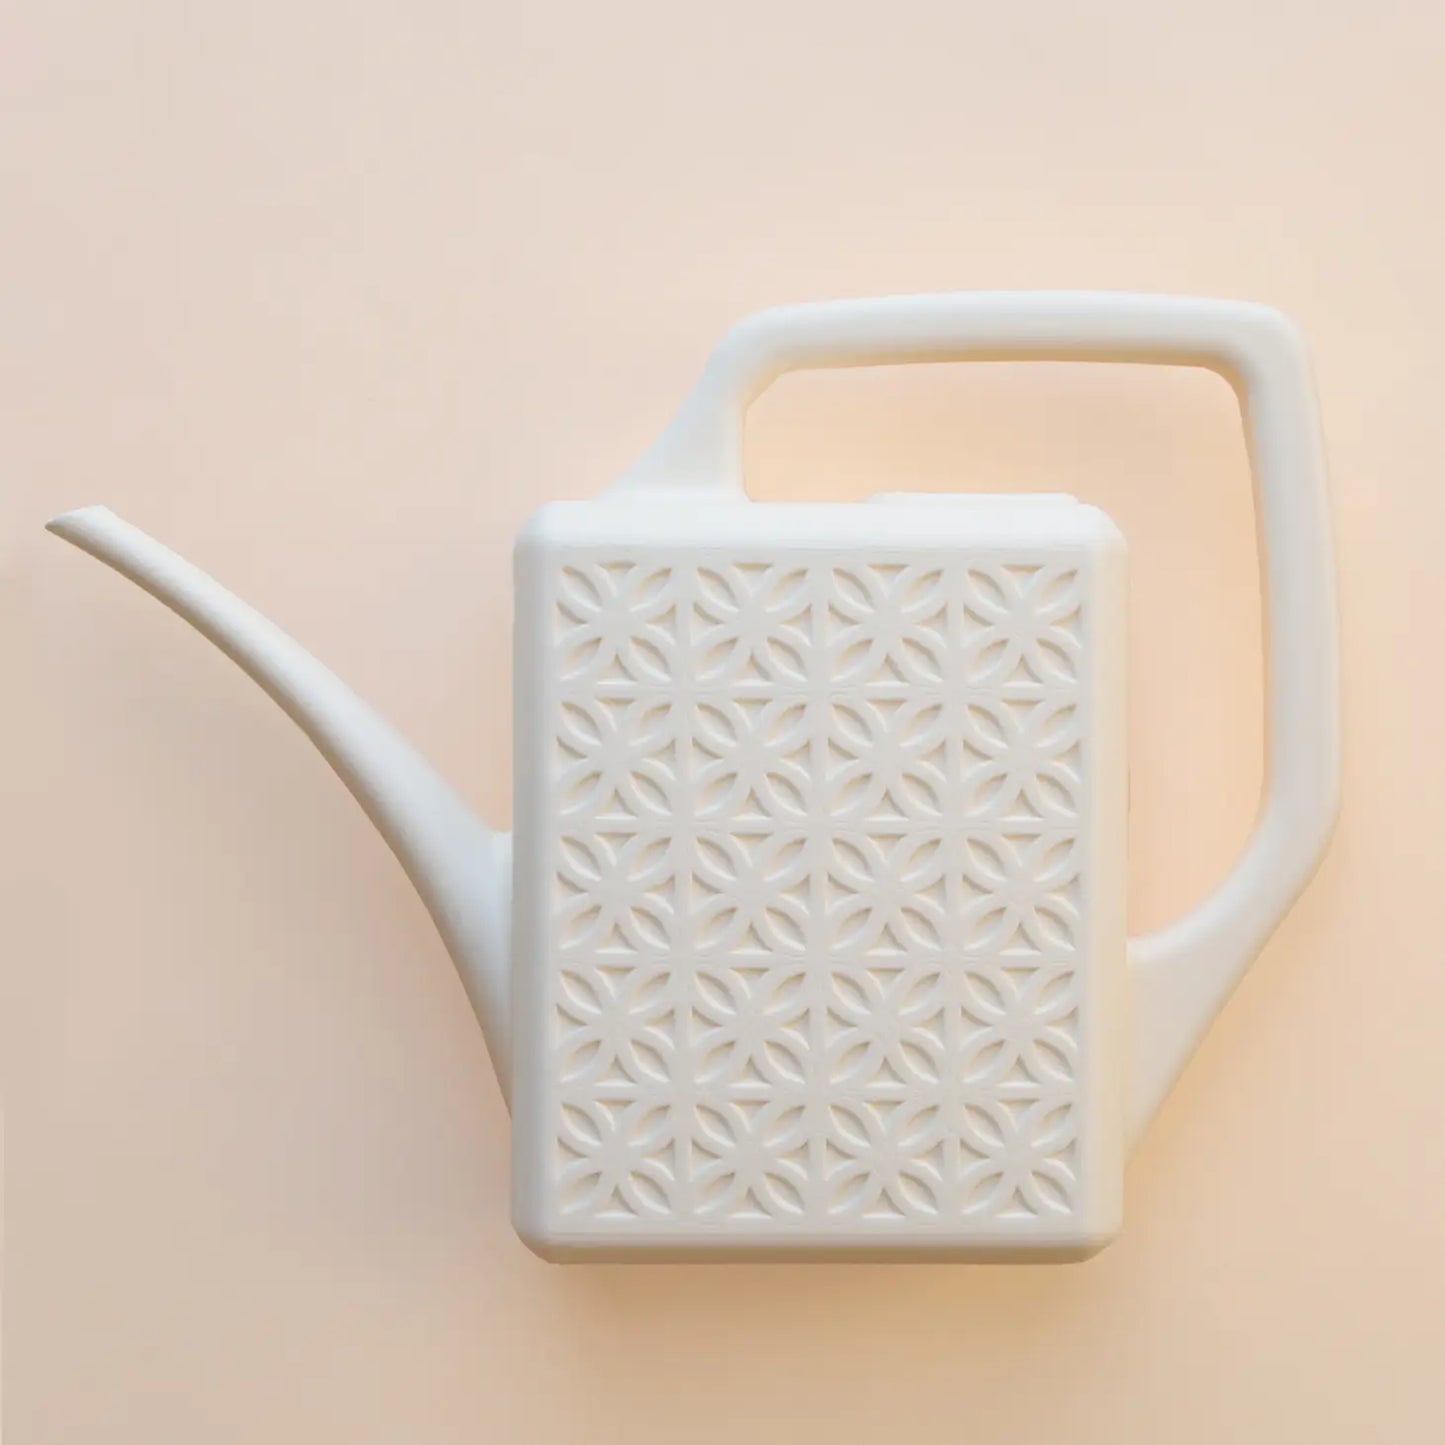 On a peachy background is a white plastic watering can with a breeze block design on both sides along with a long spout and a squared off handle for easy watering.